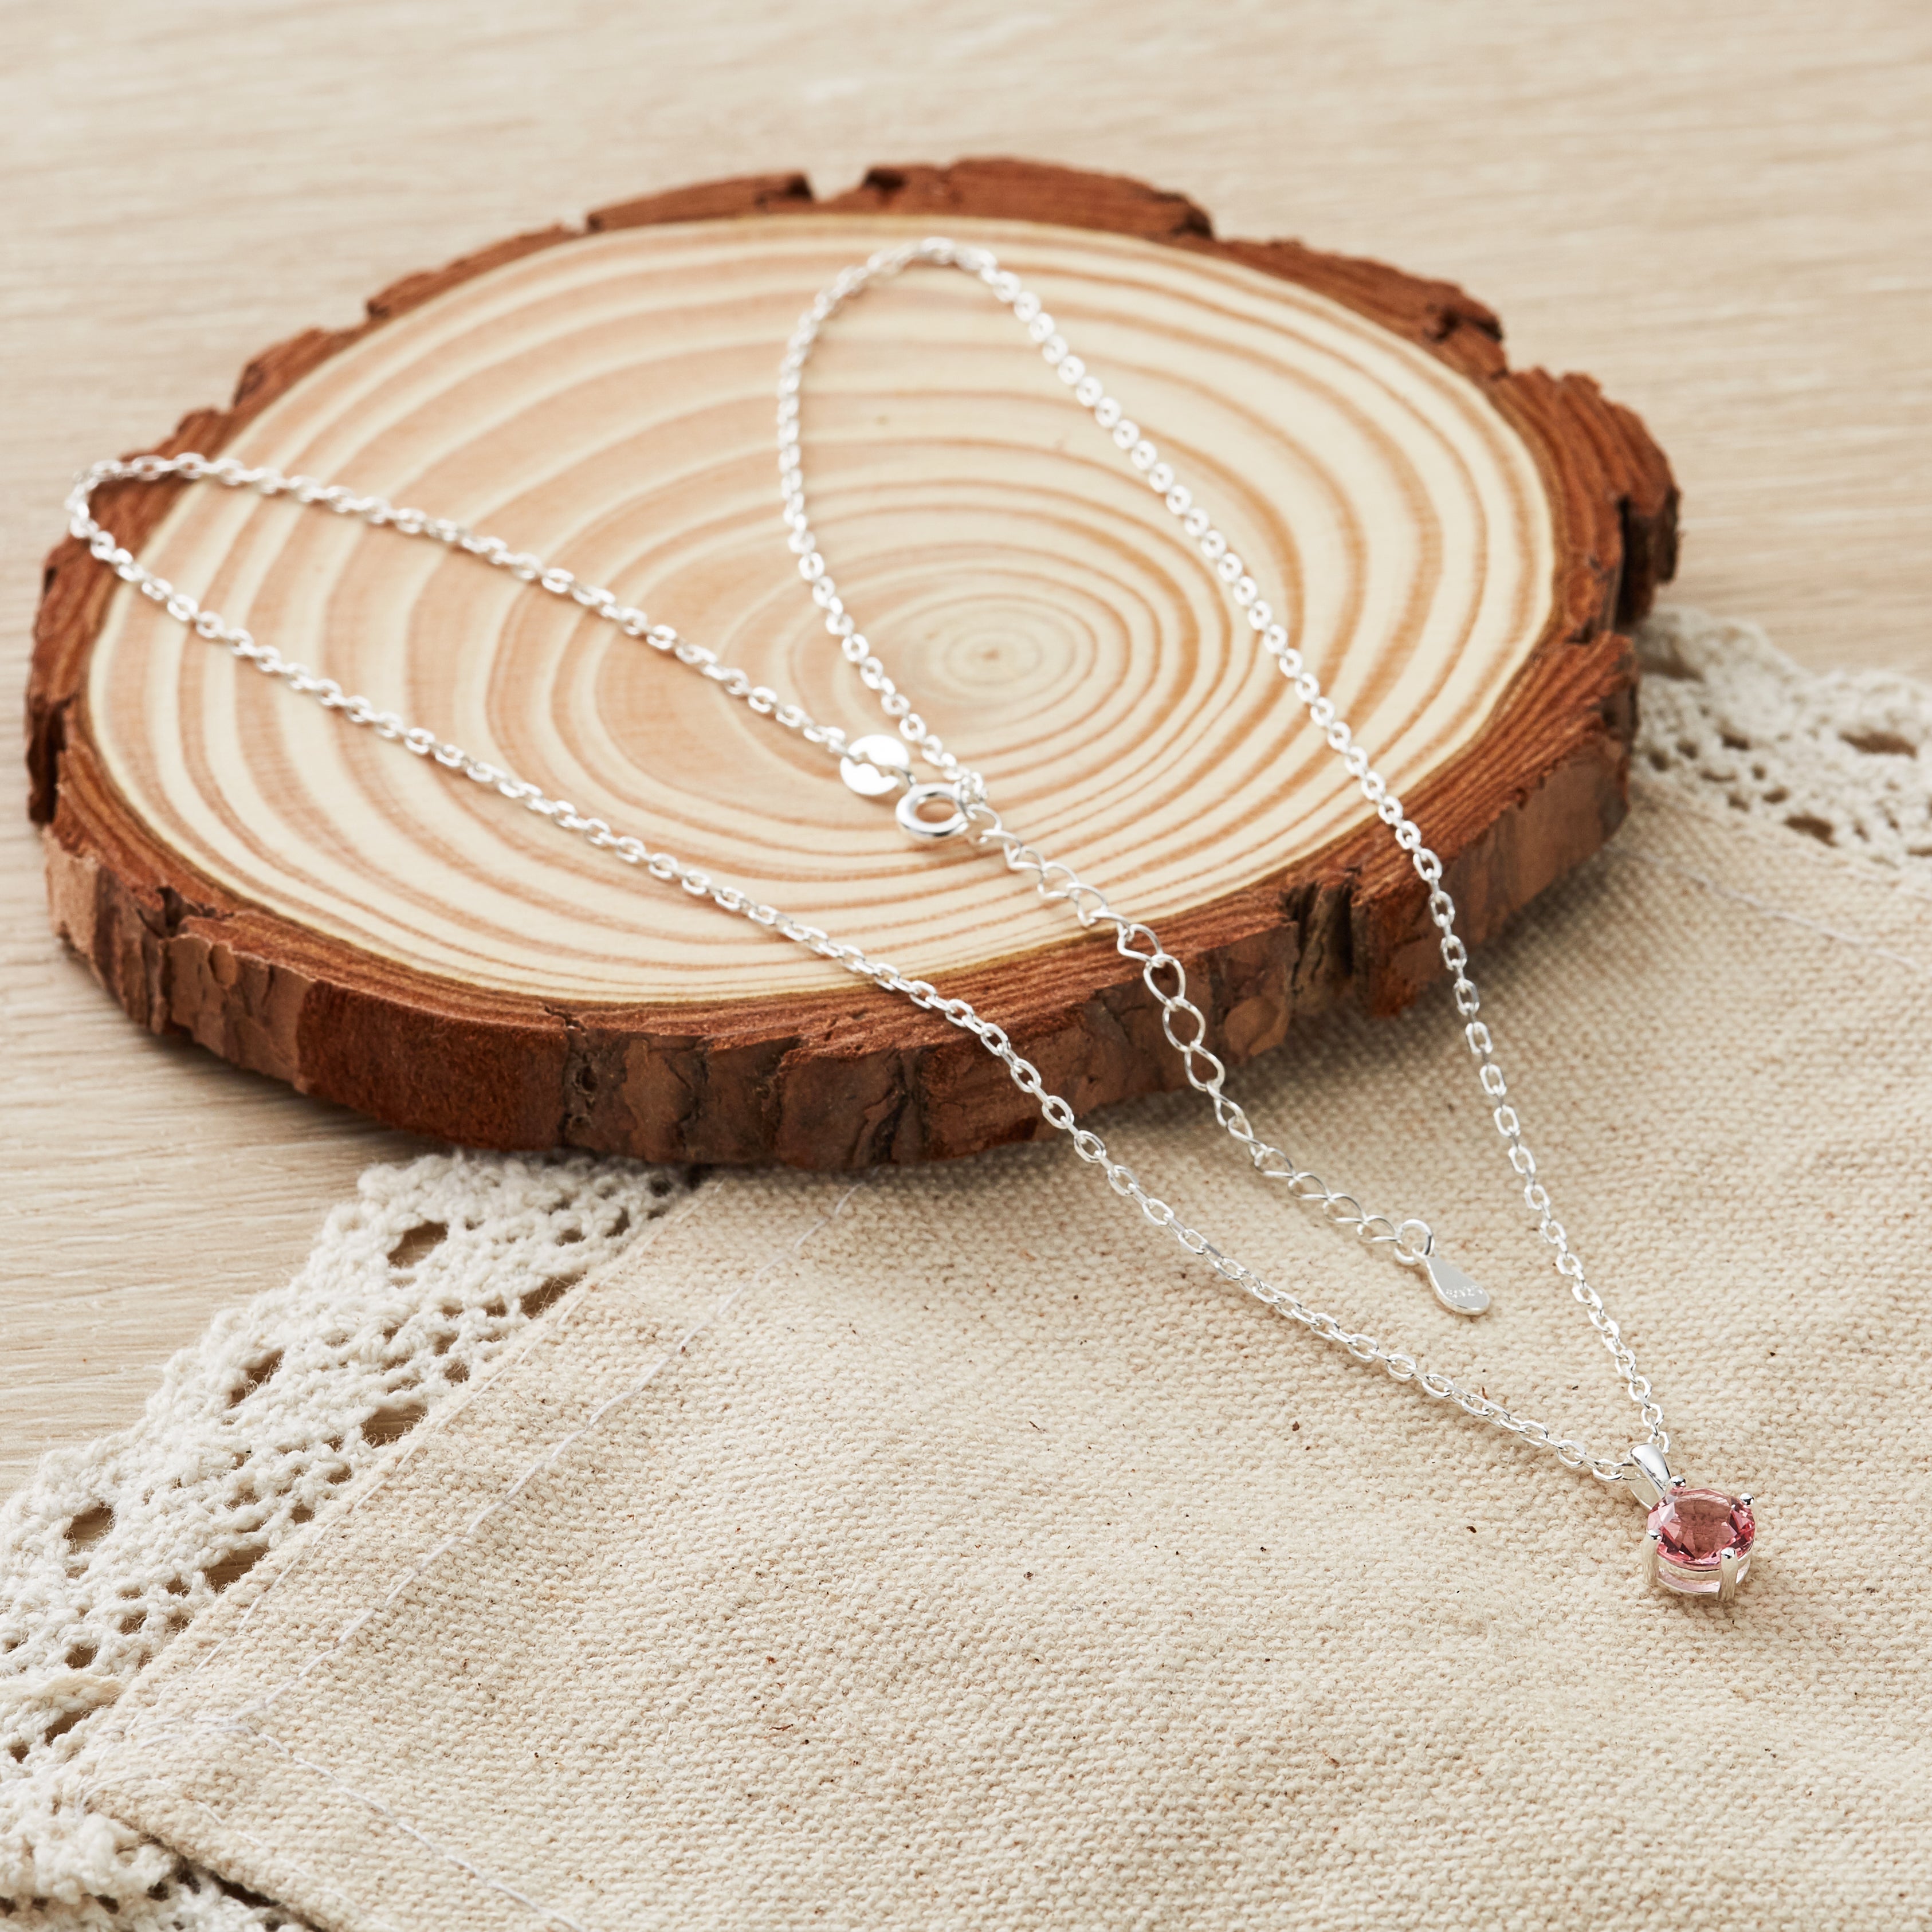 Sterling Silver Pink Necklace Created with Zircondia® Crystals